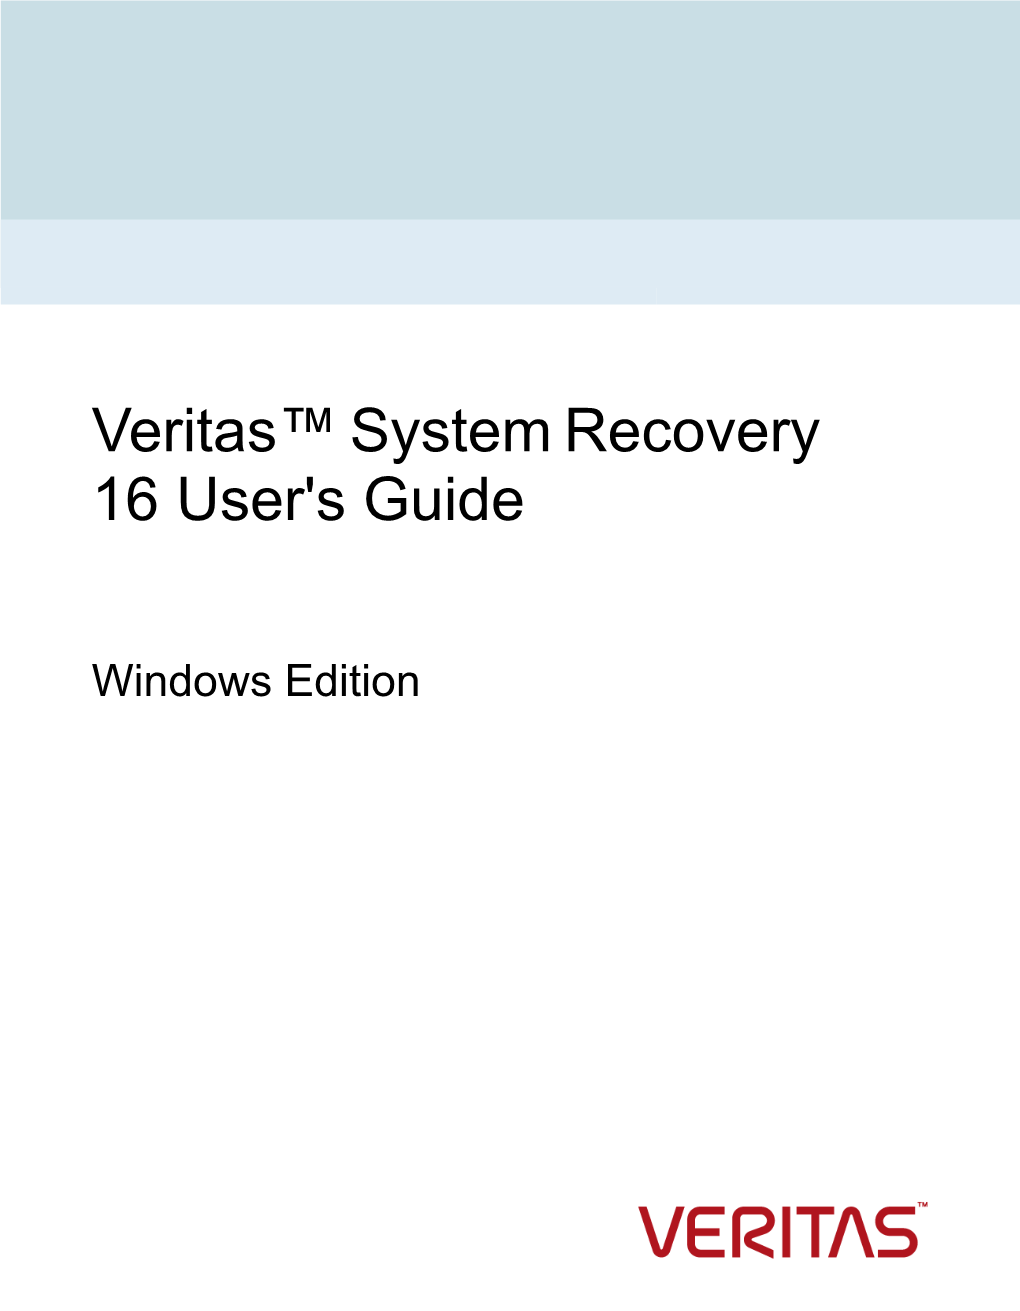 Veritas™ System Recovery 16 User's Guide